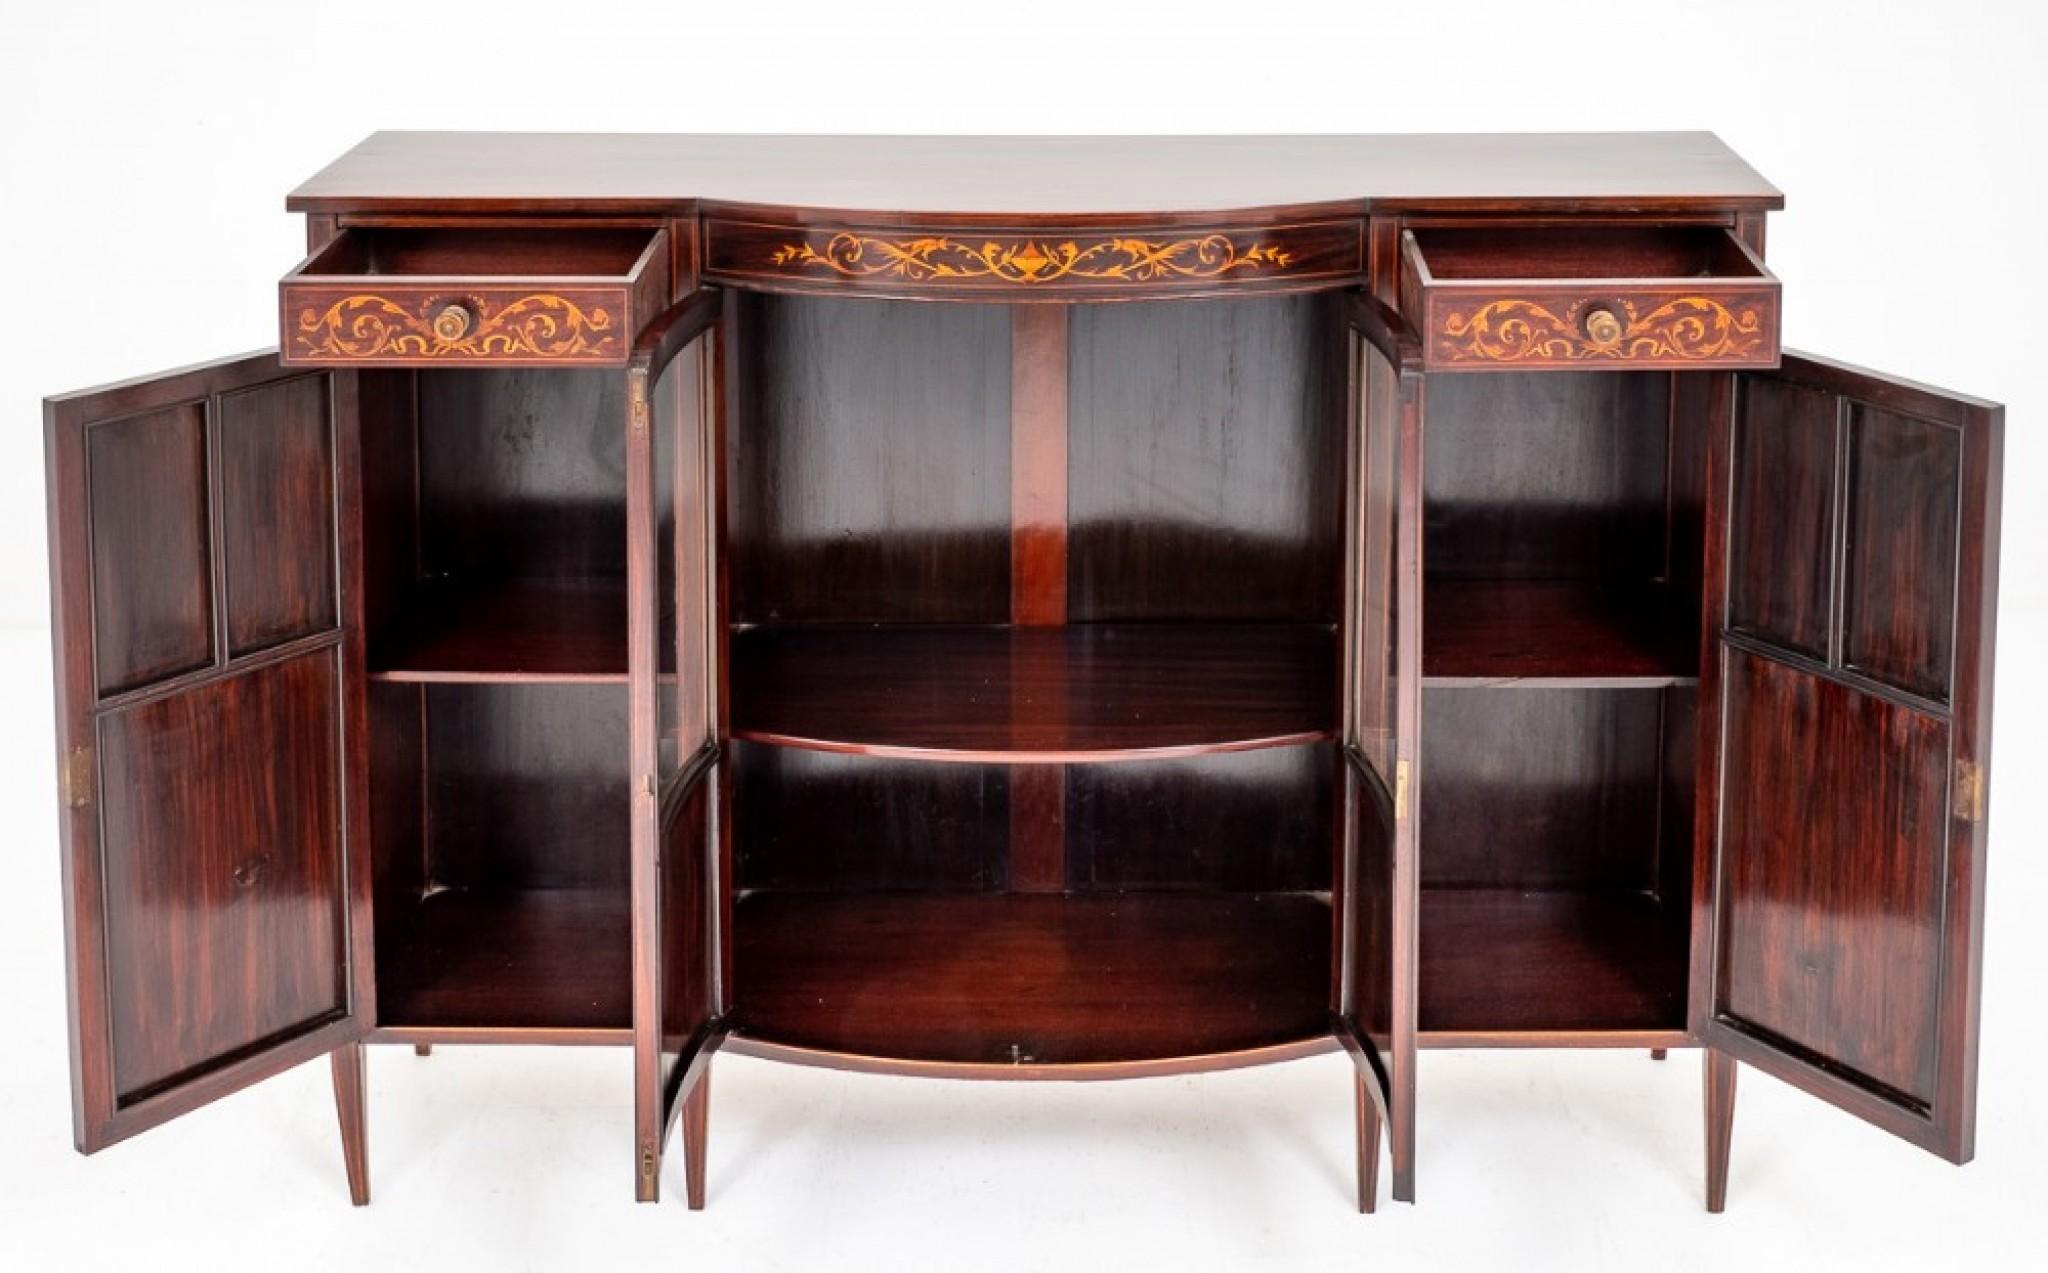 Mahogany Sheraton Revival Cabinet Sideboard Edwards and Roberts 1880 For Sale